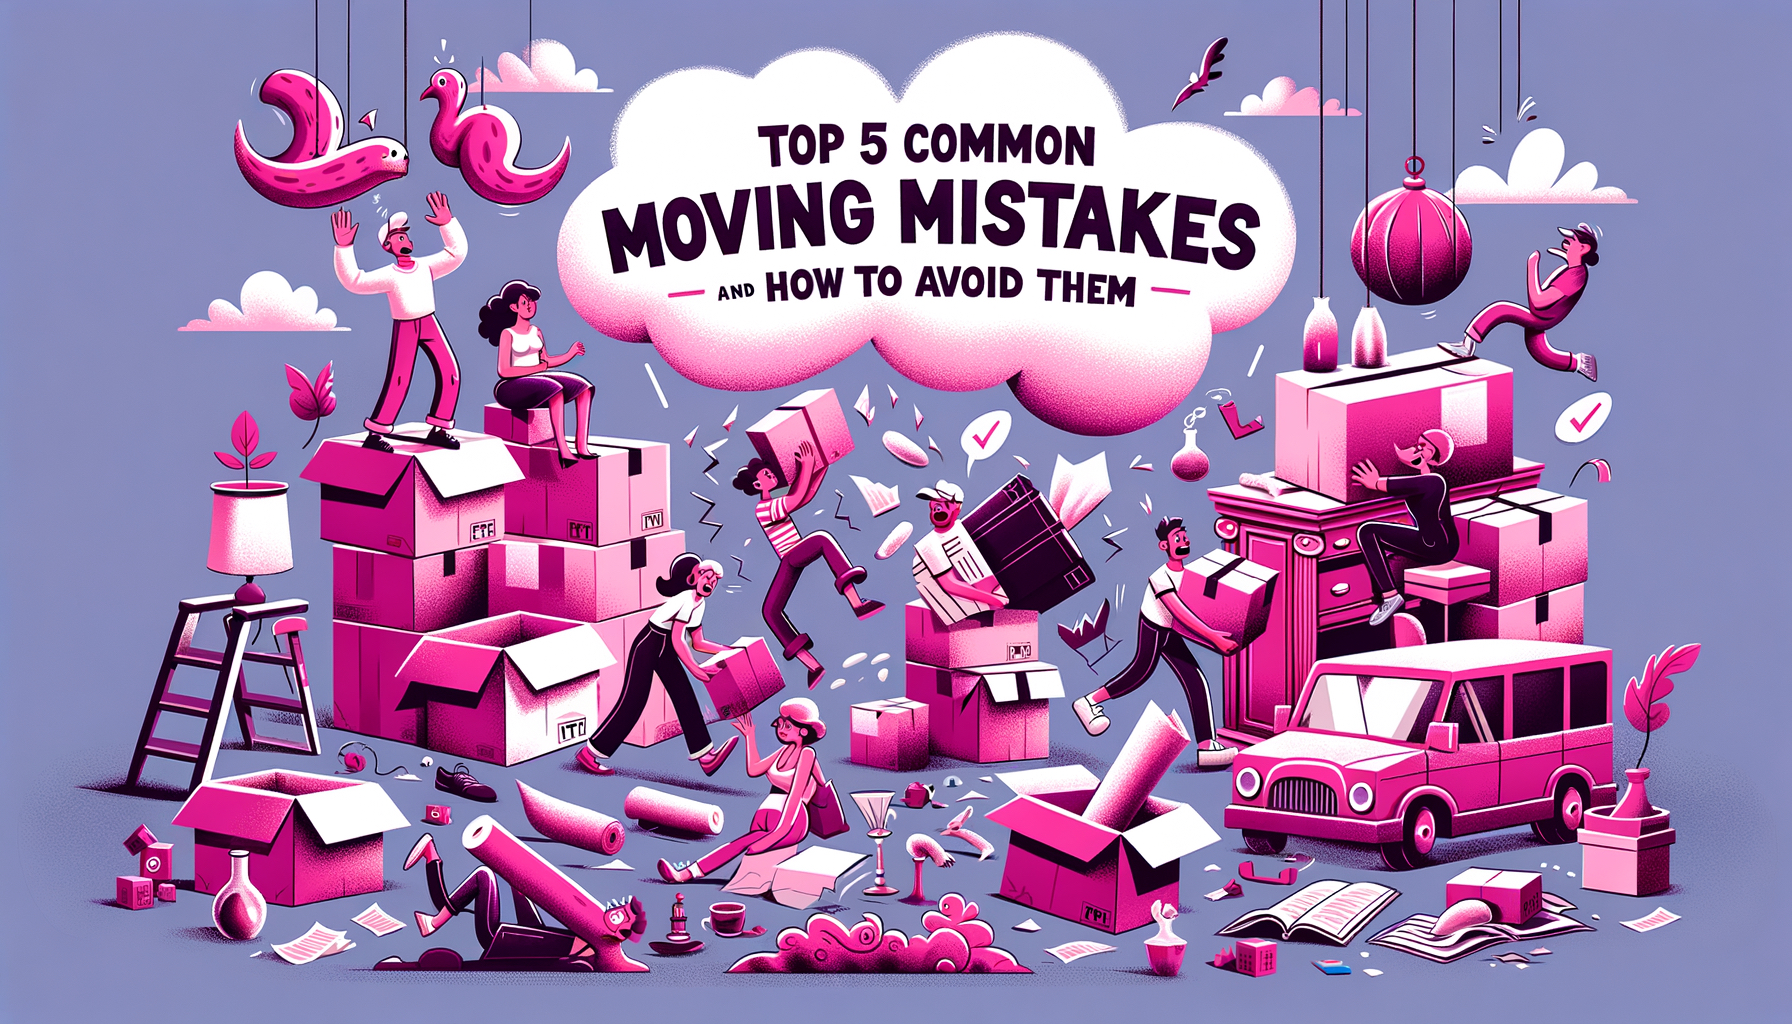 Cartoon image in fuschia color illustrating common moving mistakes.